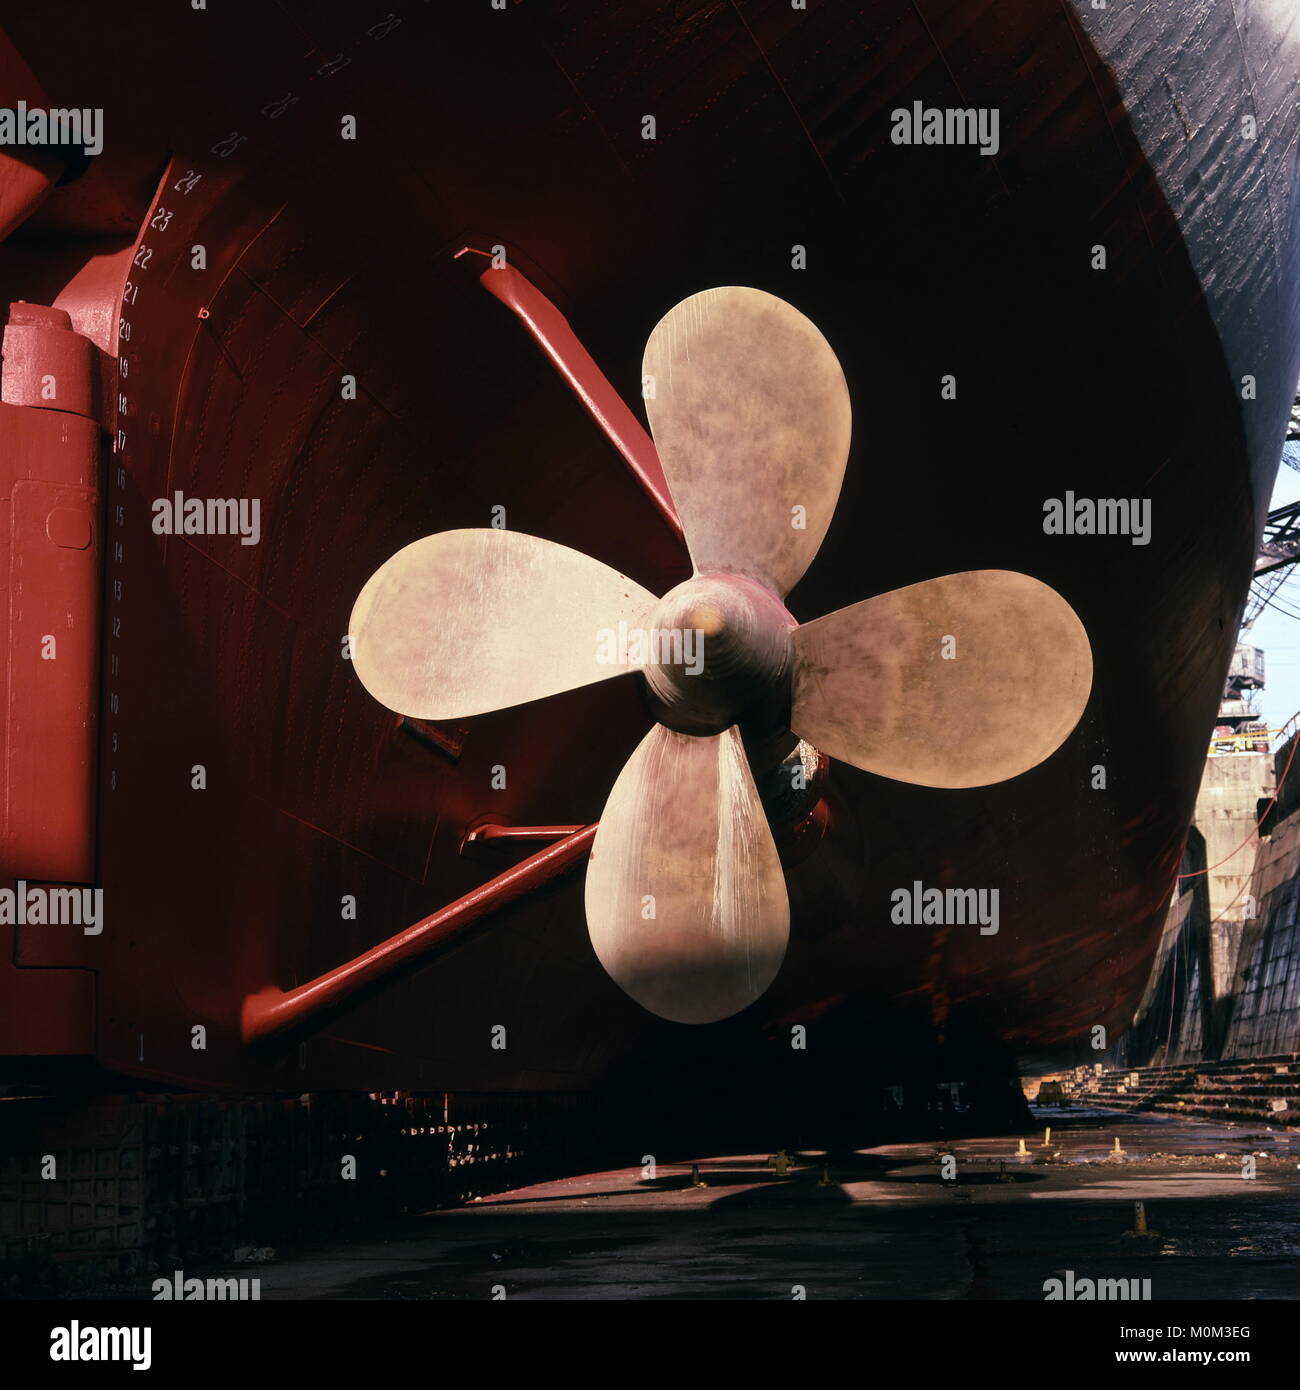 AJAXNETPHOTO. 1995. SOUTHAMPTON, ENGLAND. - HUGE STARBOARD PROPELLOR OF THE P&O LINER CANBERRA. SHIP UNDERGOING REFIT IN KGV DRY DOCK.   PHOTO: JONATHAN EASTLAND/AJAX.  REF:950429 15 Stock Photo